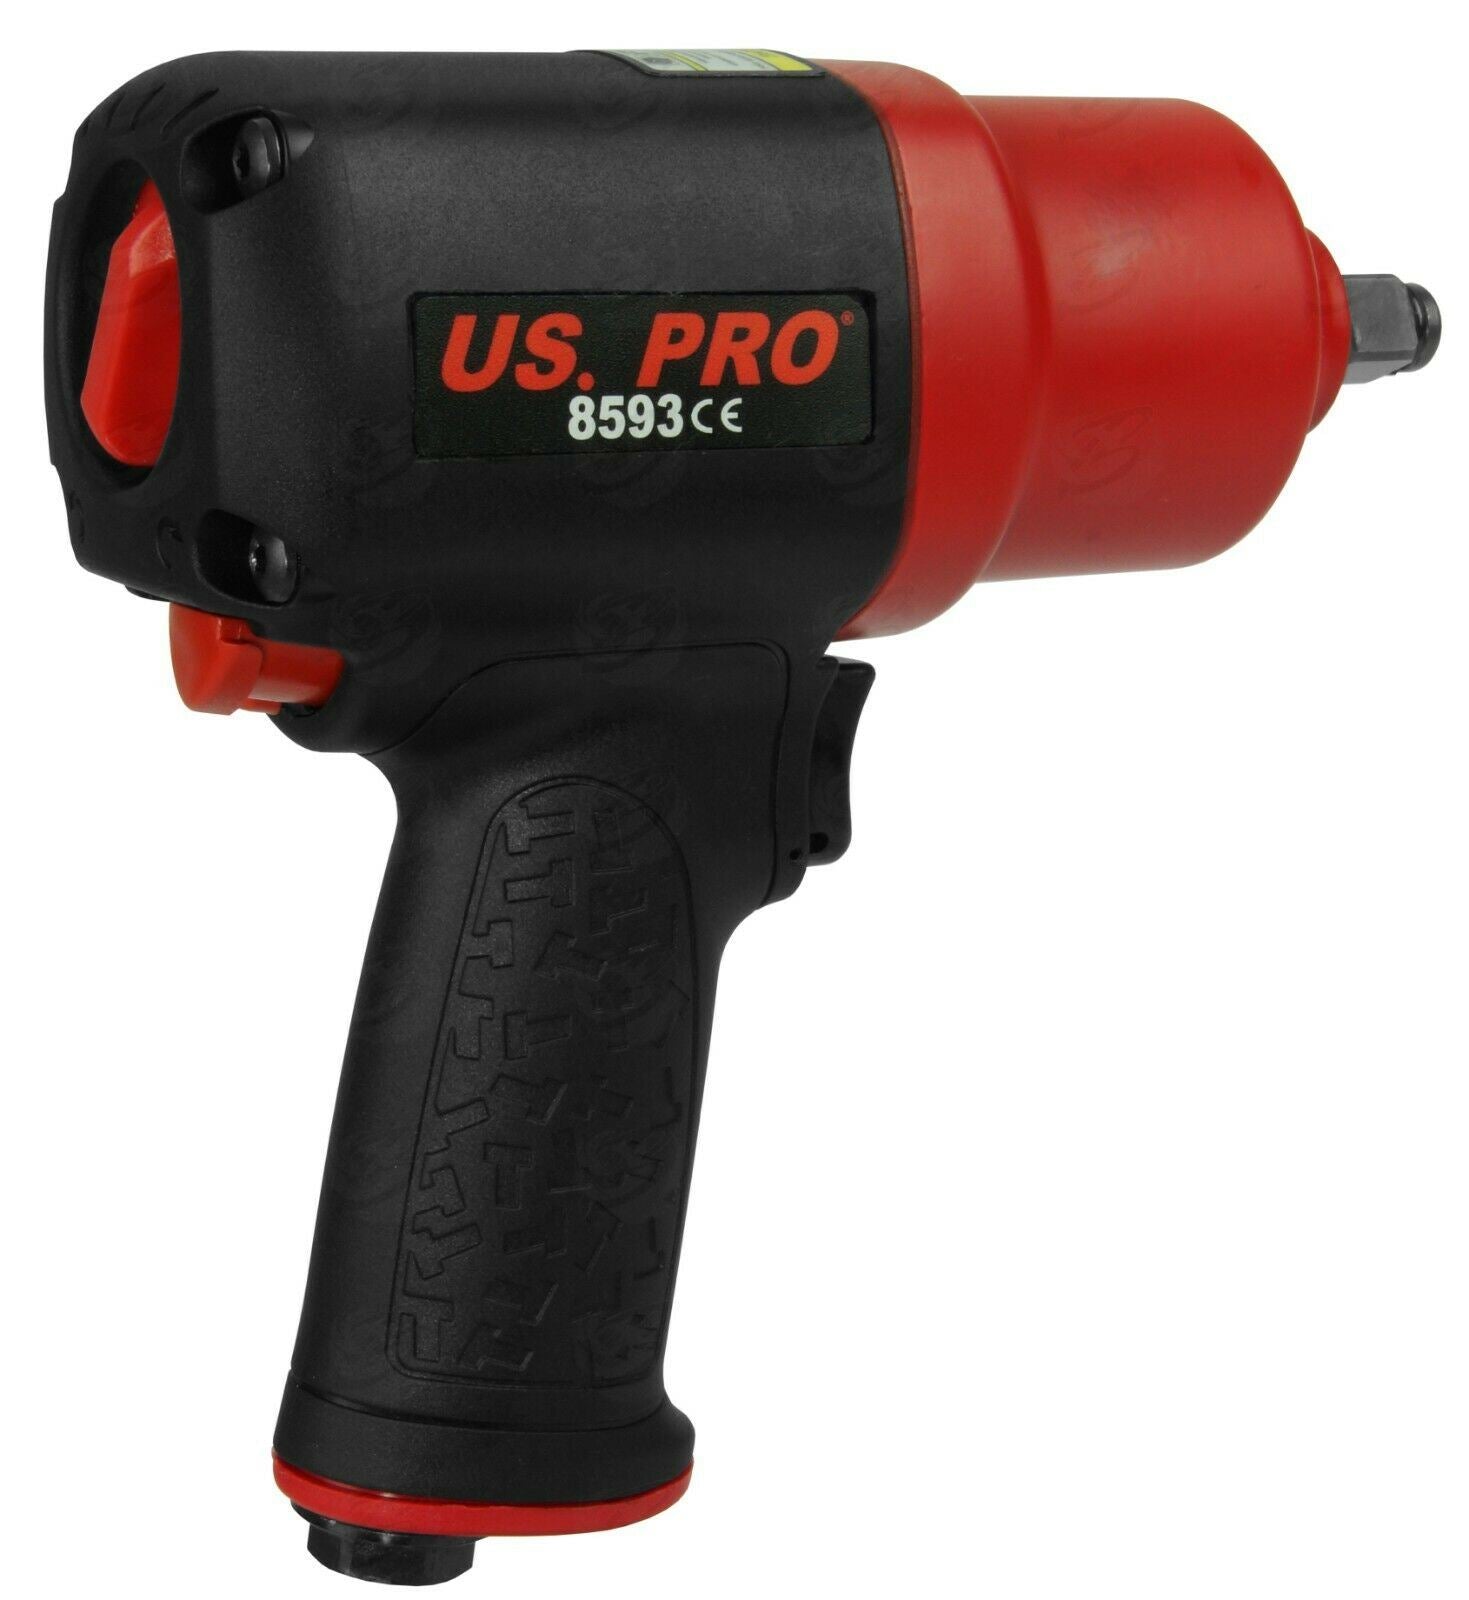 US PRO 1/2" DRIVE COMPOSITE AIR IMPACT WRENCH 1286Nm